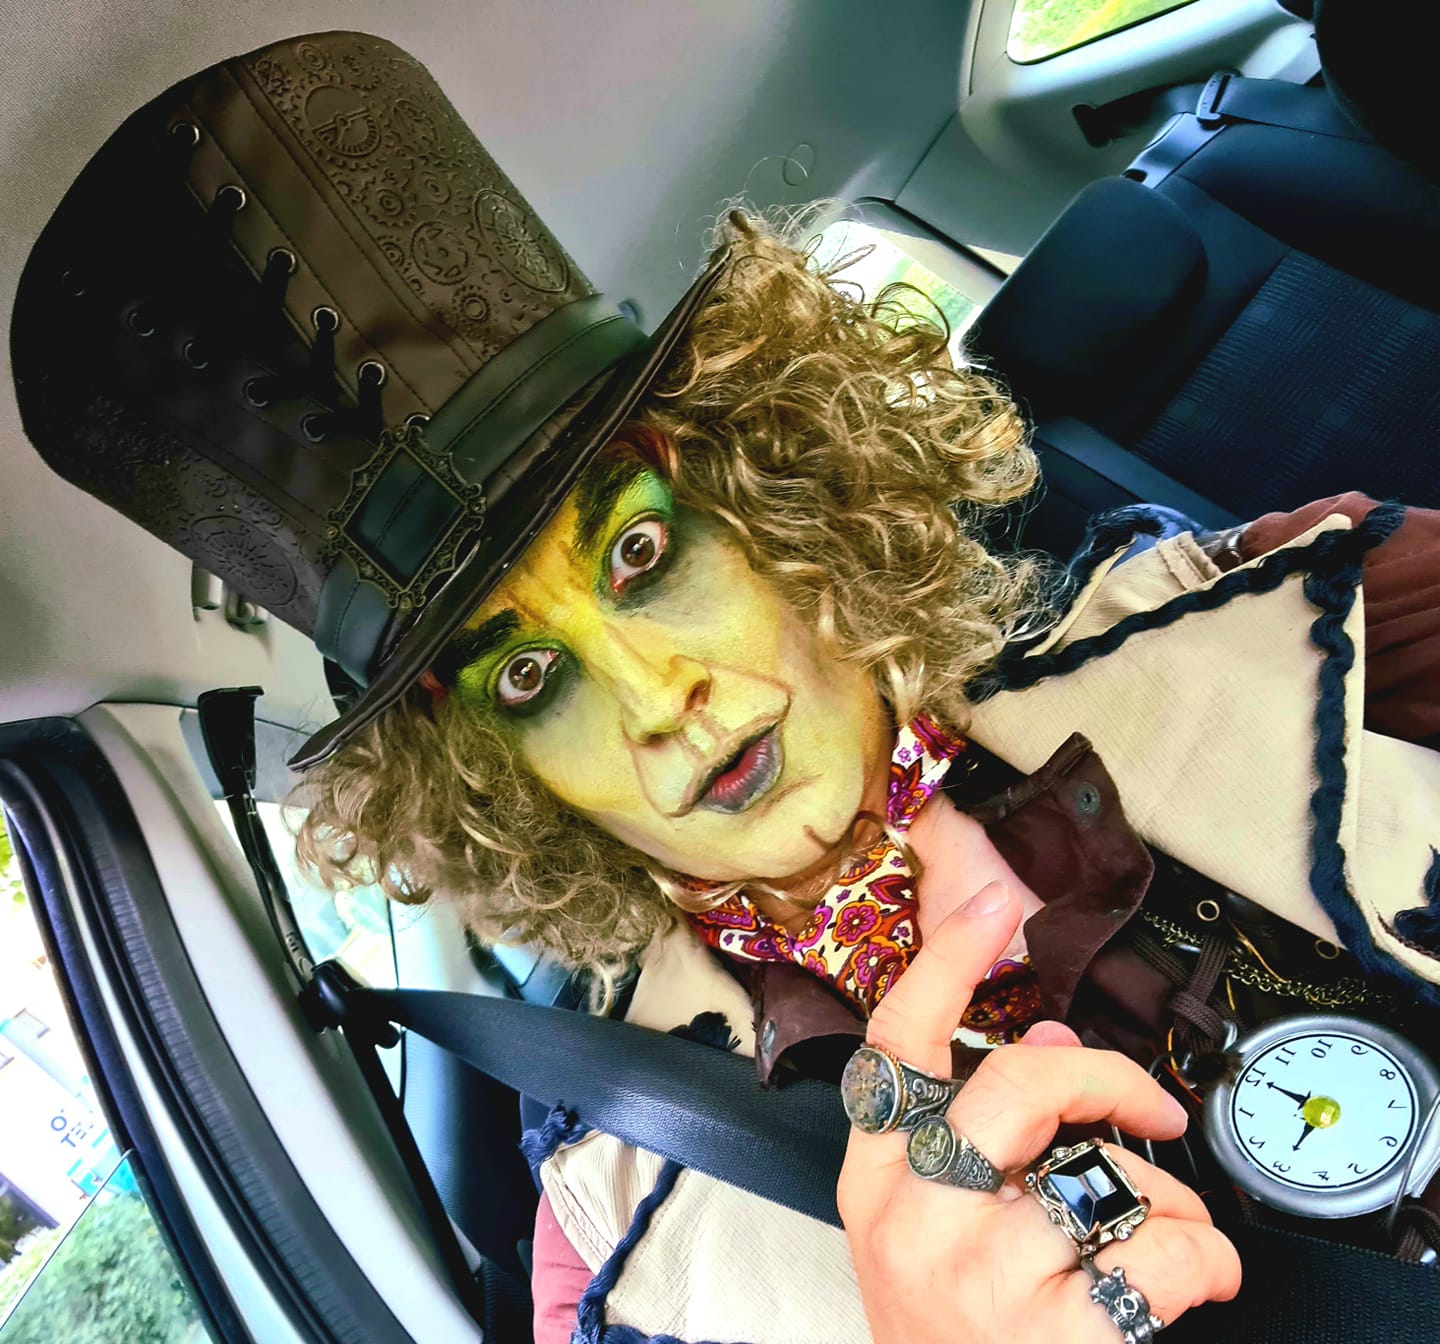 Stefan Pejic as The Mad Hatter from Alice in Wonderland